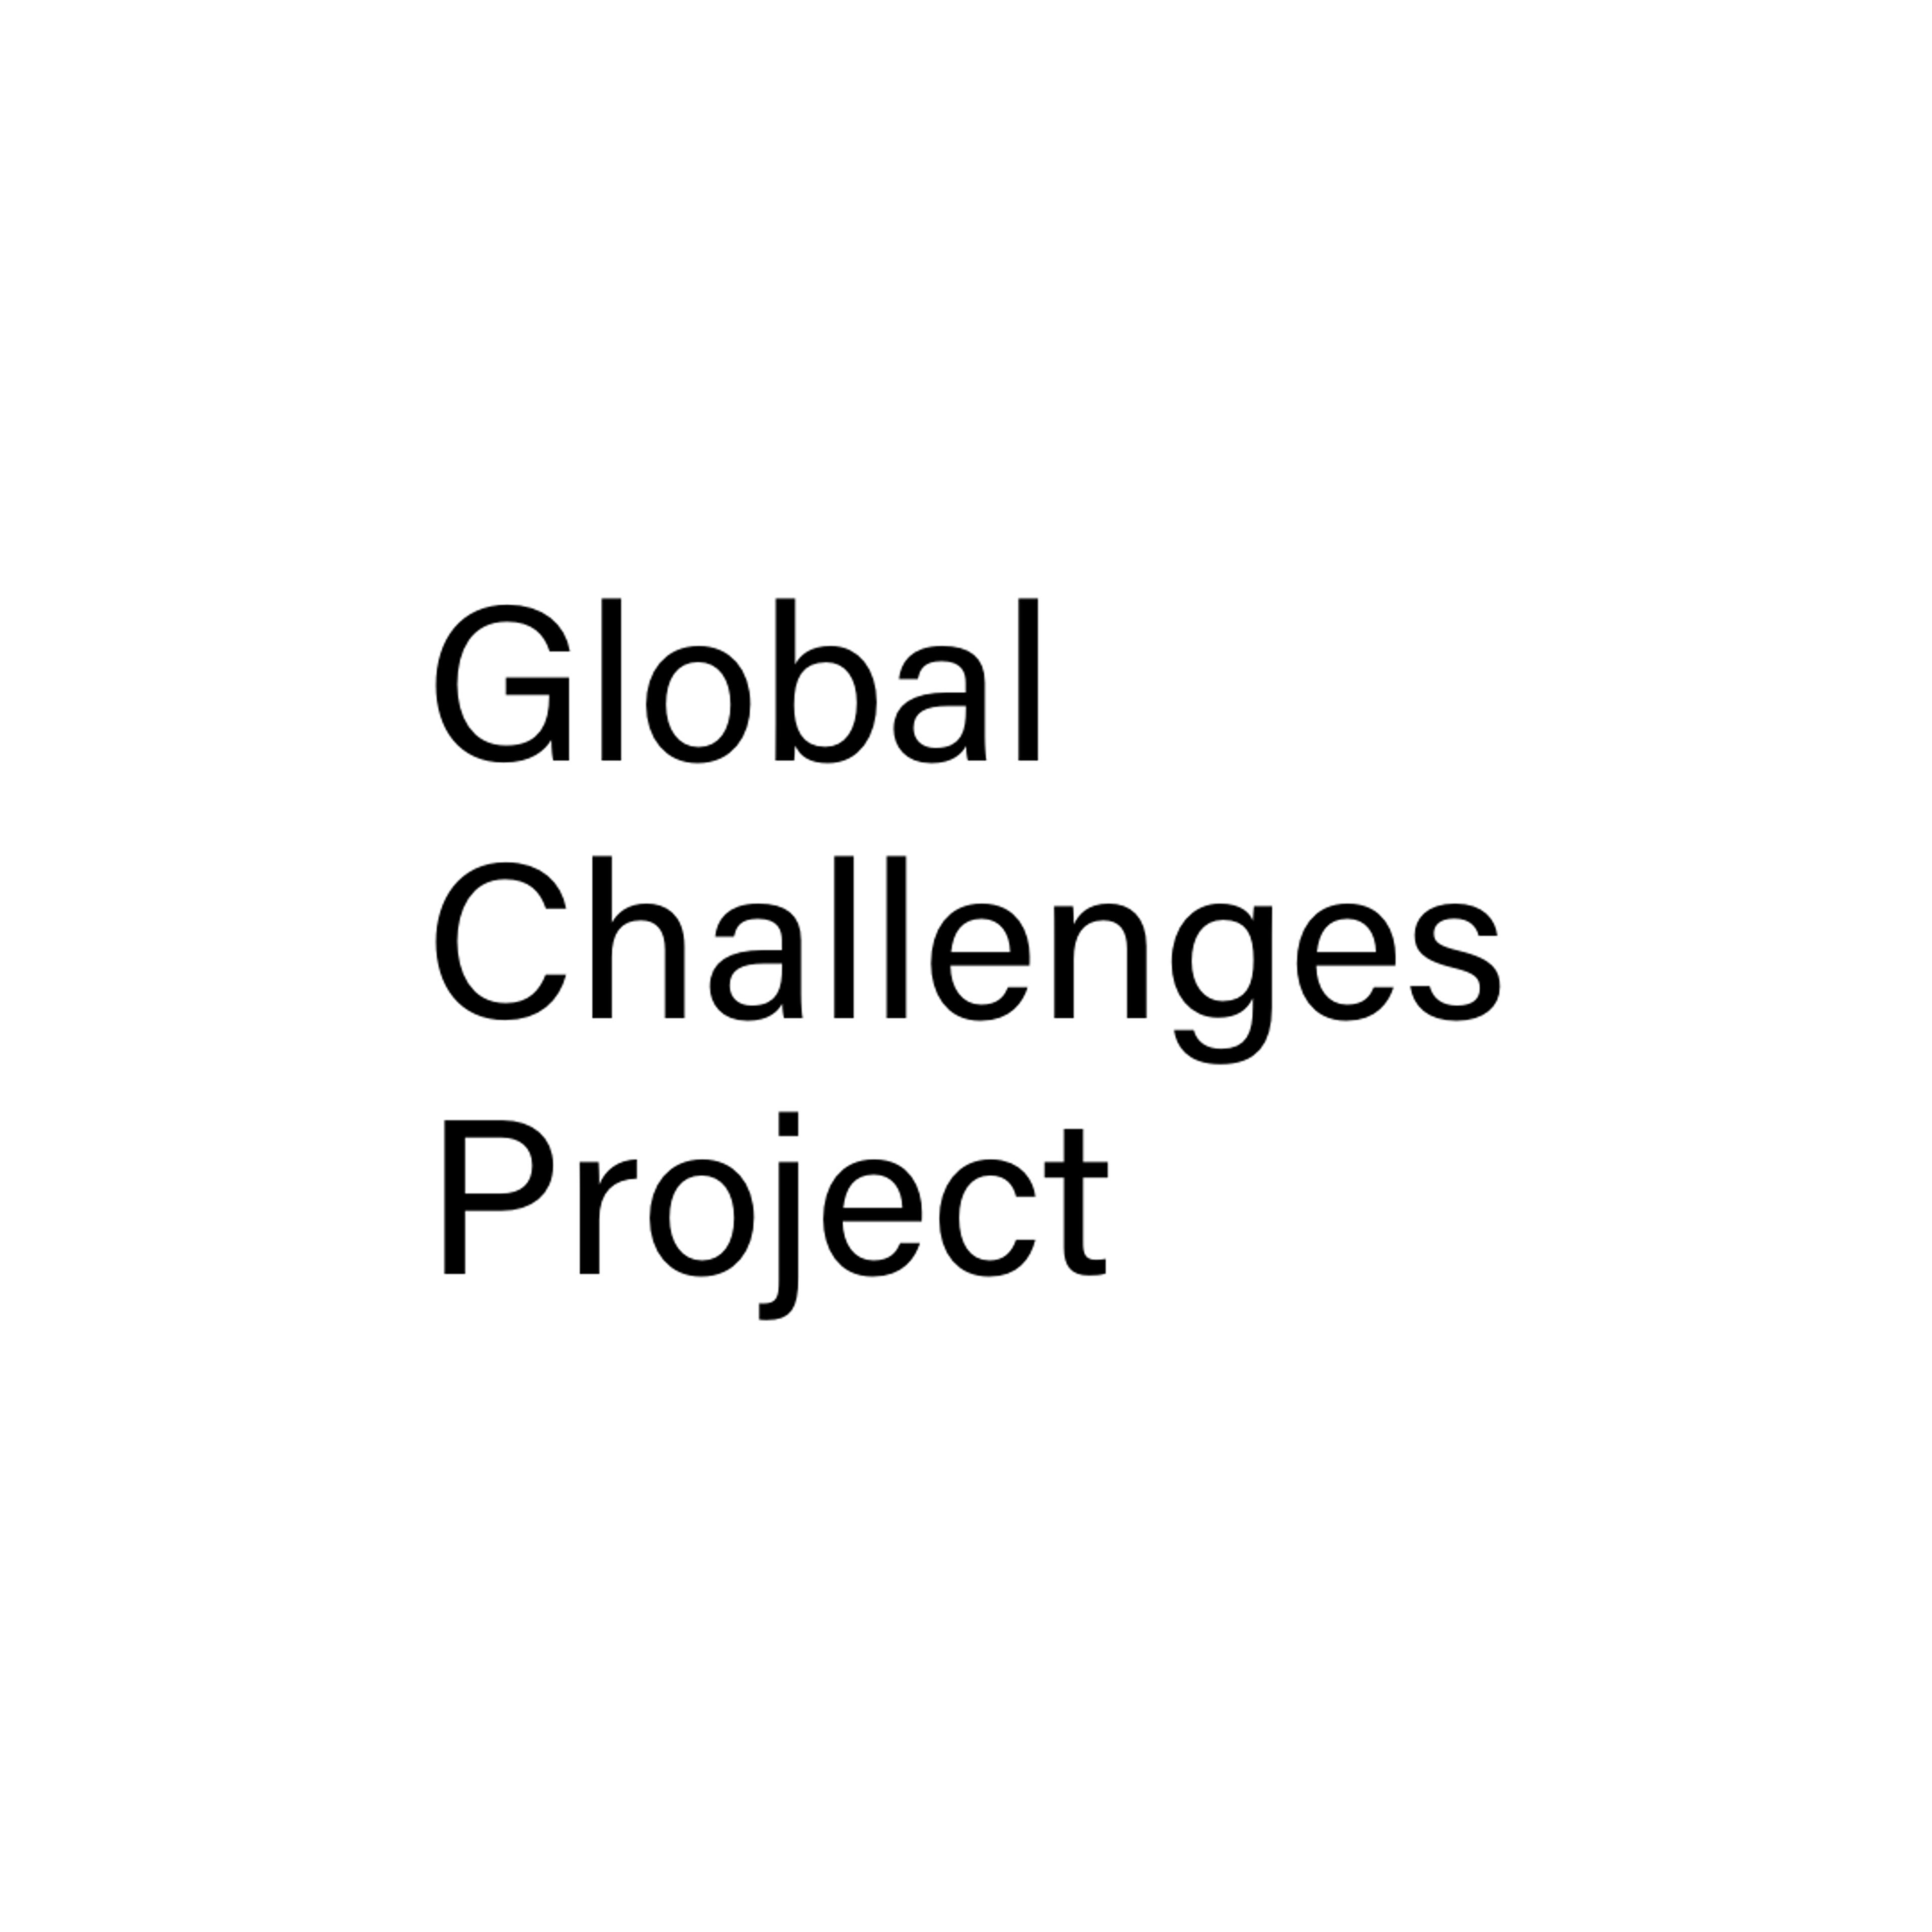 Global Challenges Project